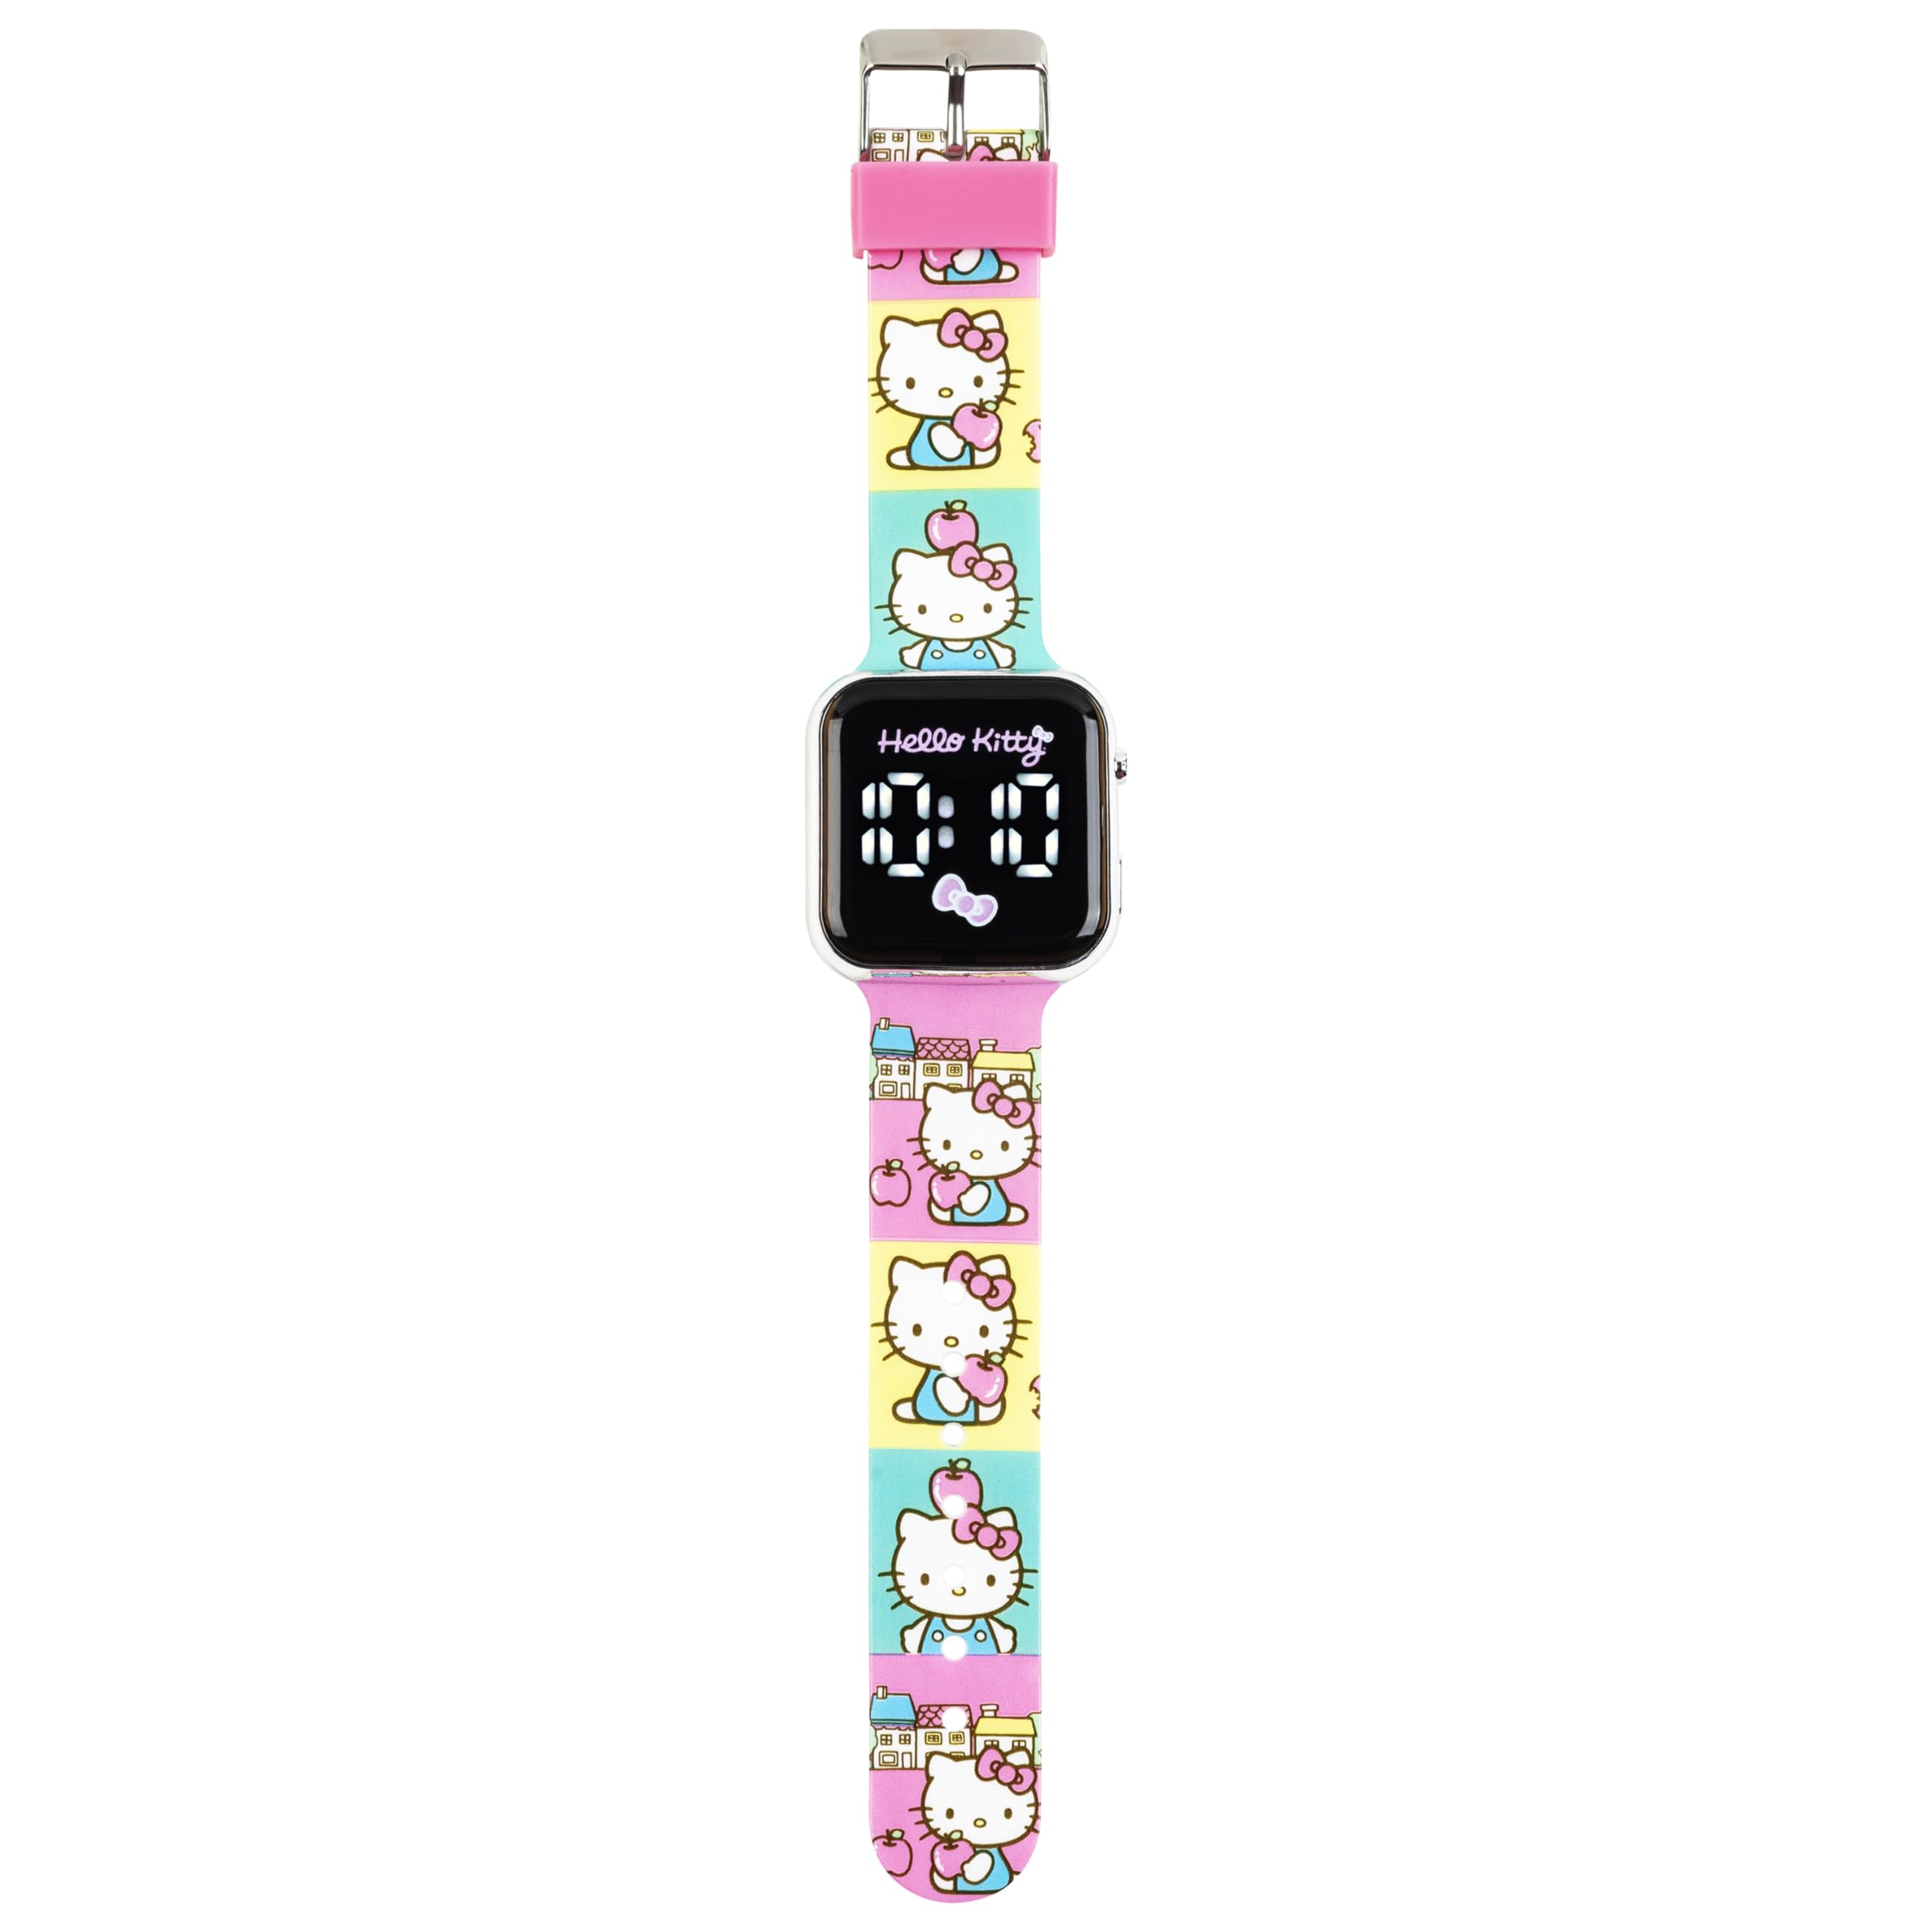 Accutime Hello Kitty Digital LED Quartz Kids Pink and White Watch for Girls with White Hello Kitty and Friends Band Strap (Model: HK4147AZ)